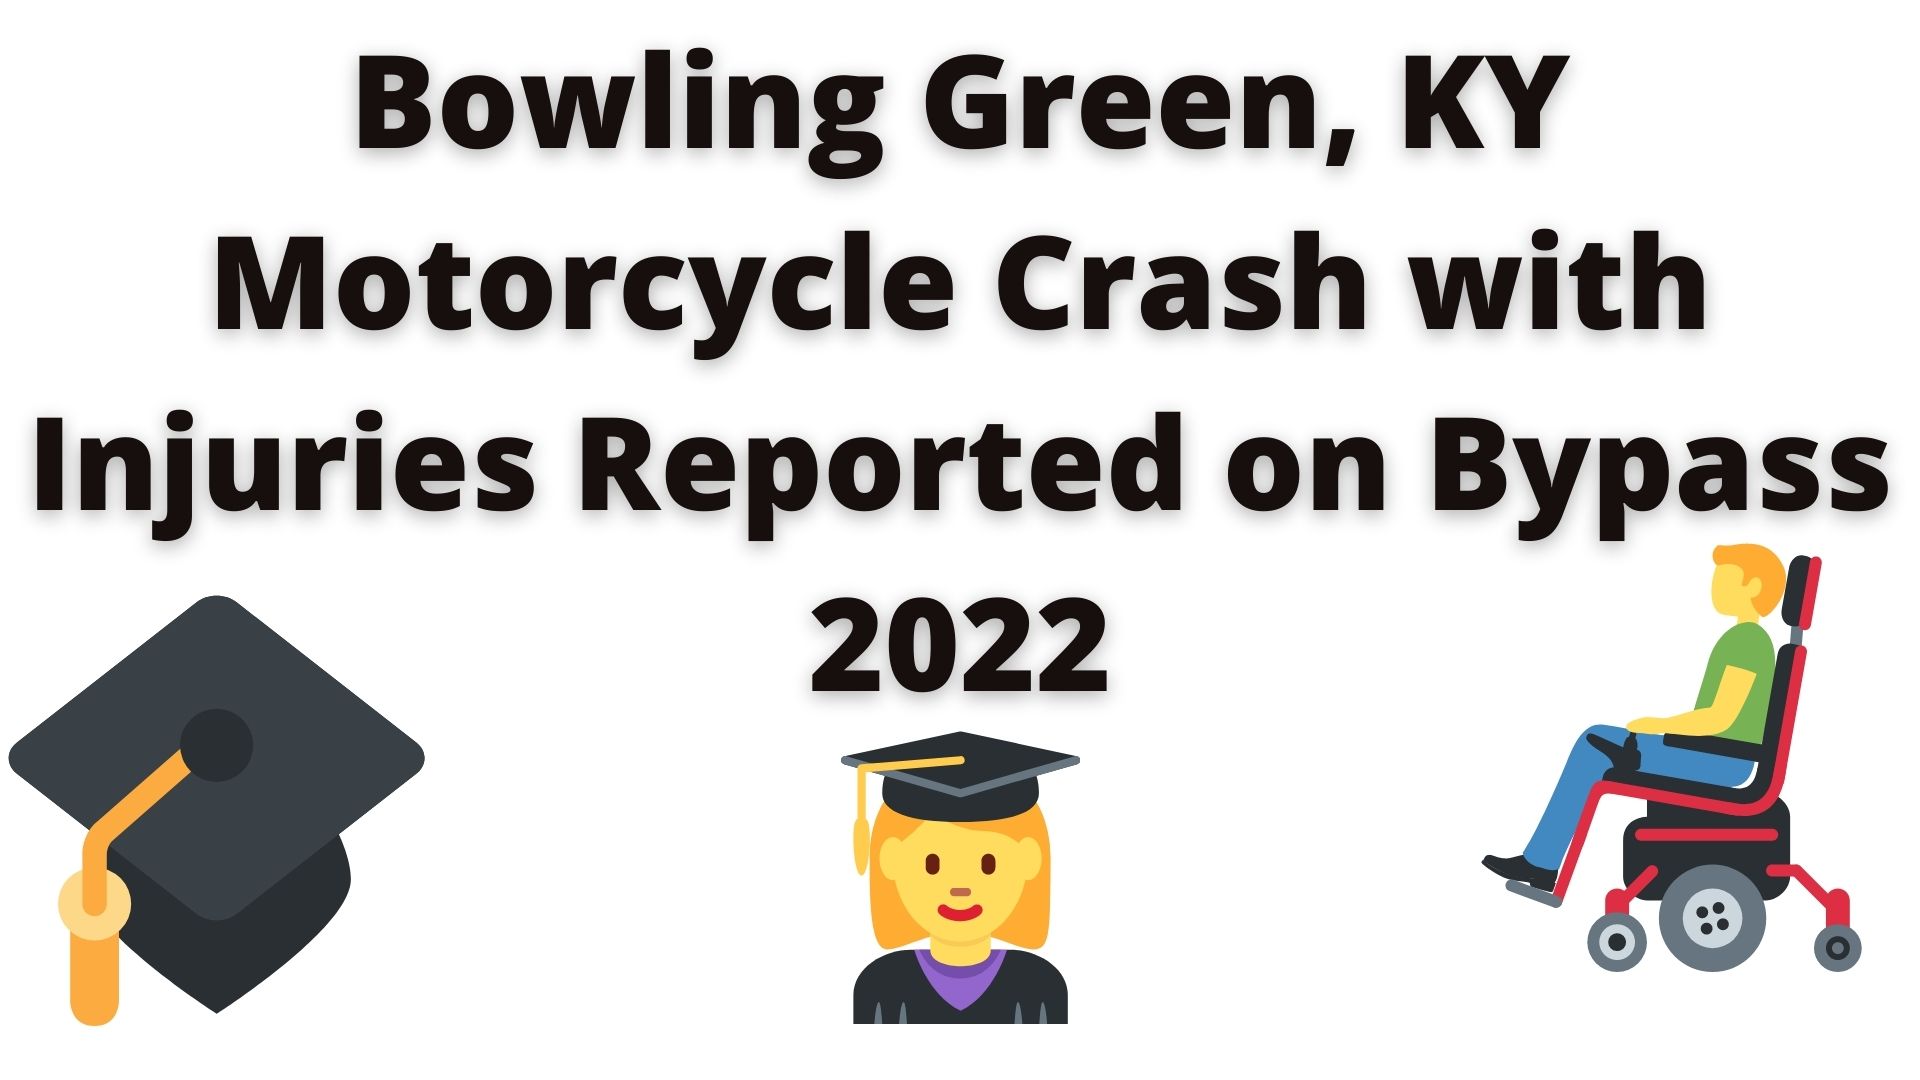 Bowling Green, Ky Motorcycle Crash With Injuries Reported On Bypass 2022